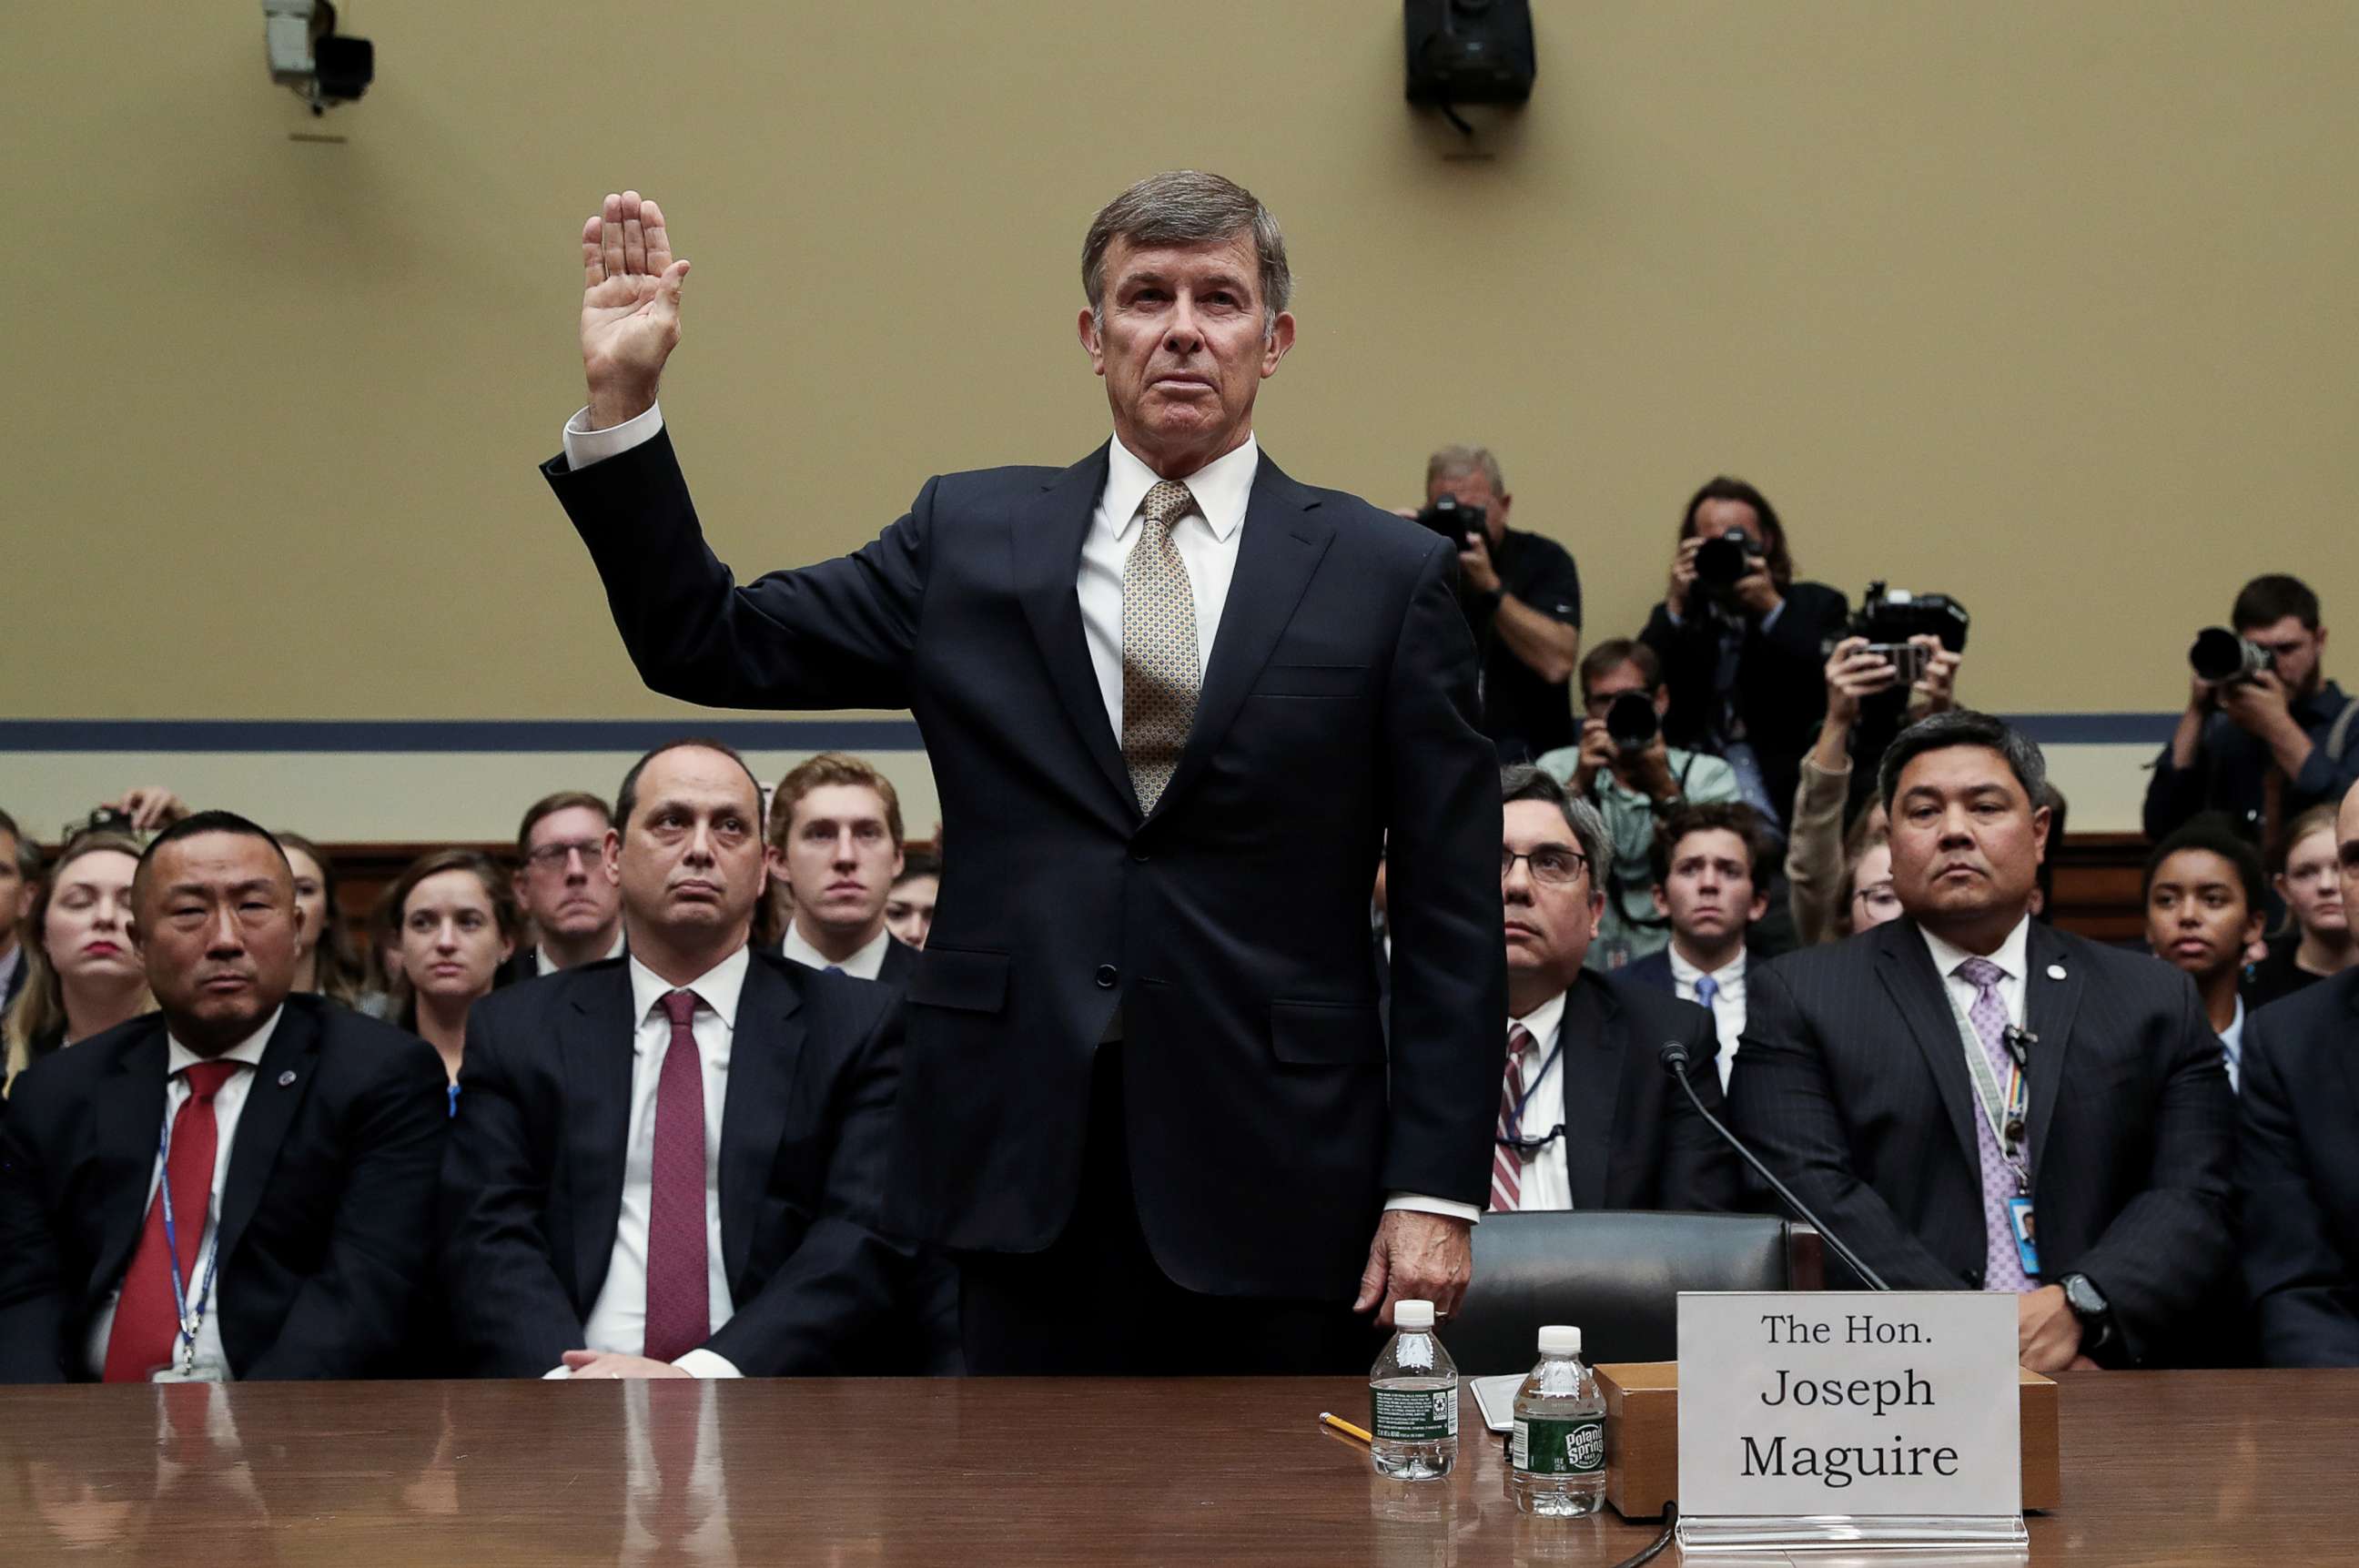 PHOTO: Acting Director of National Intelligence Joseph Maguire is sworn in to testify before a House Intelligence Committee on Capitol Hill in Washington, D.C., Sept. 26, 2019.